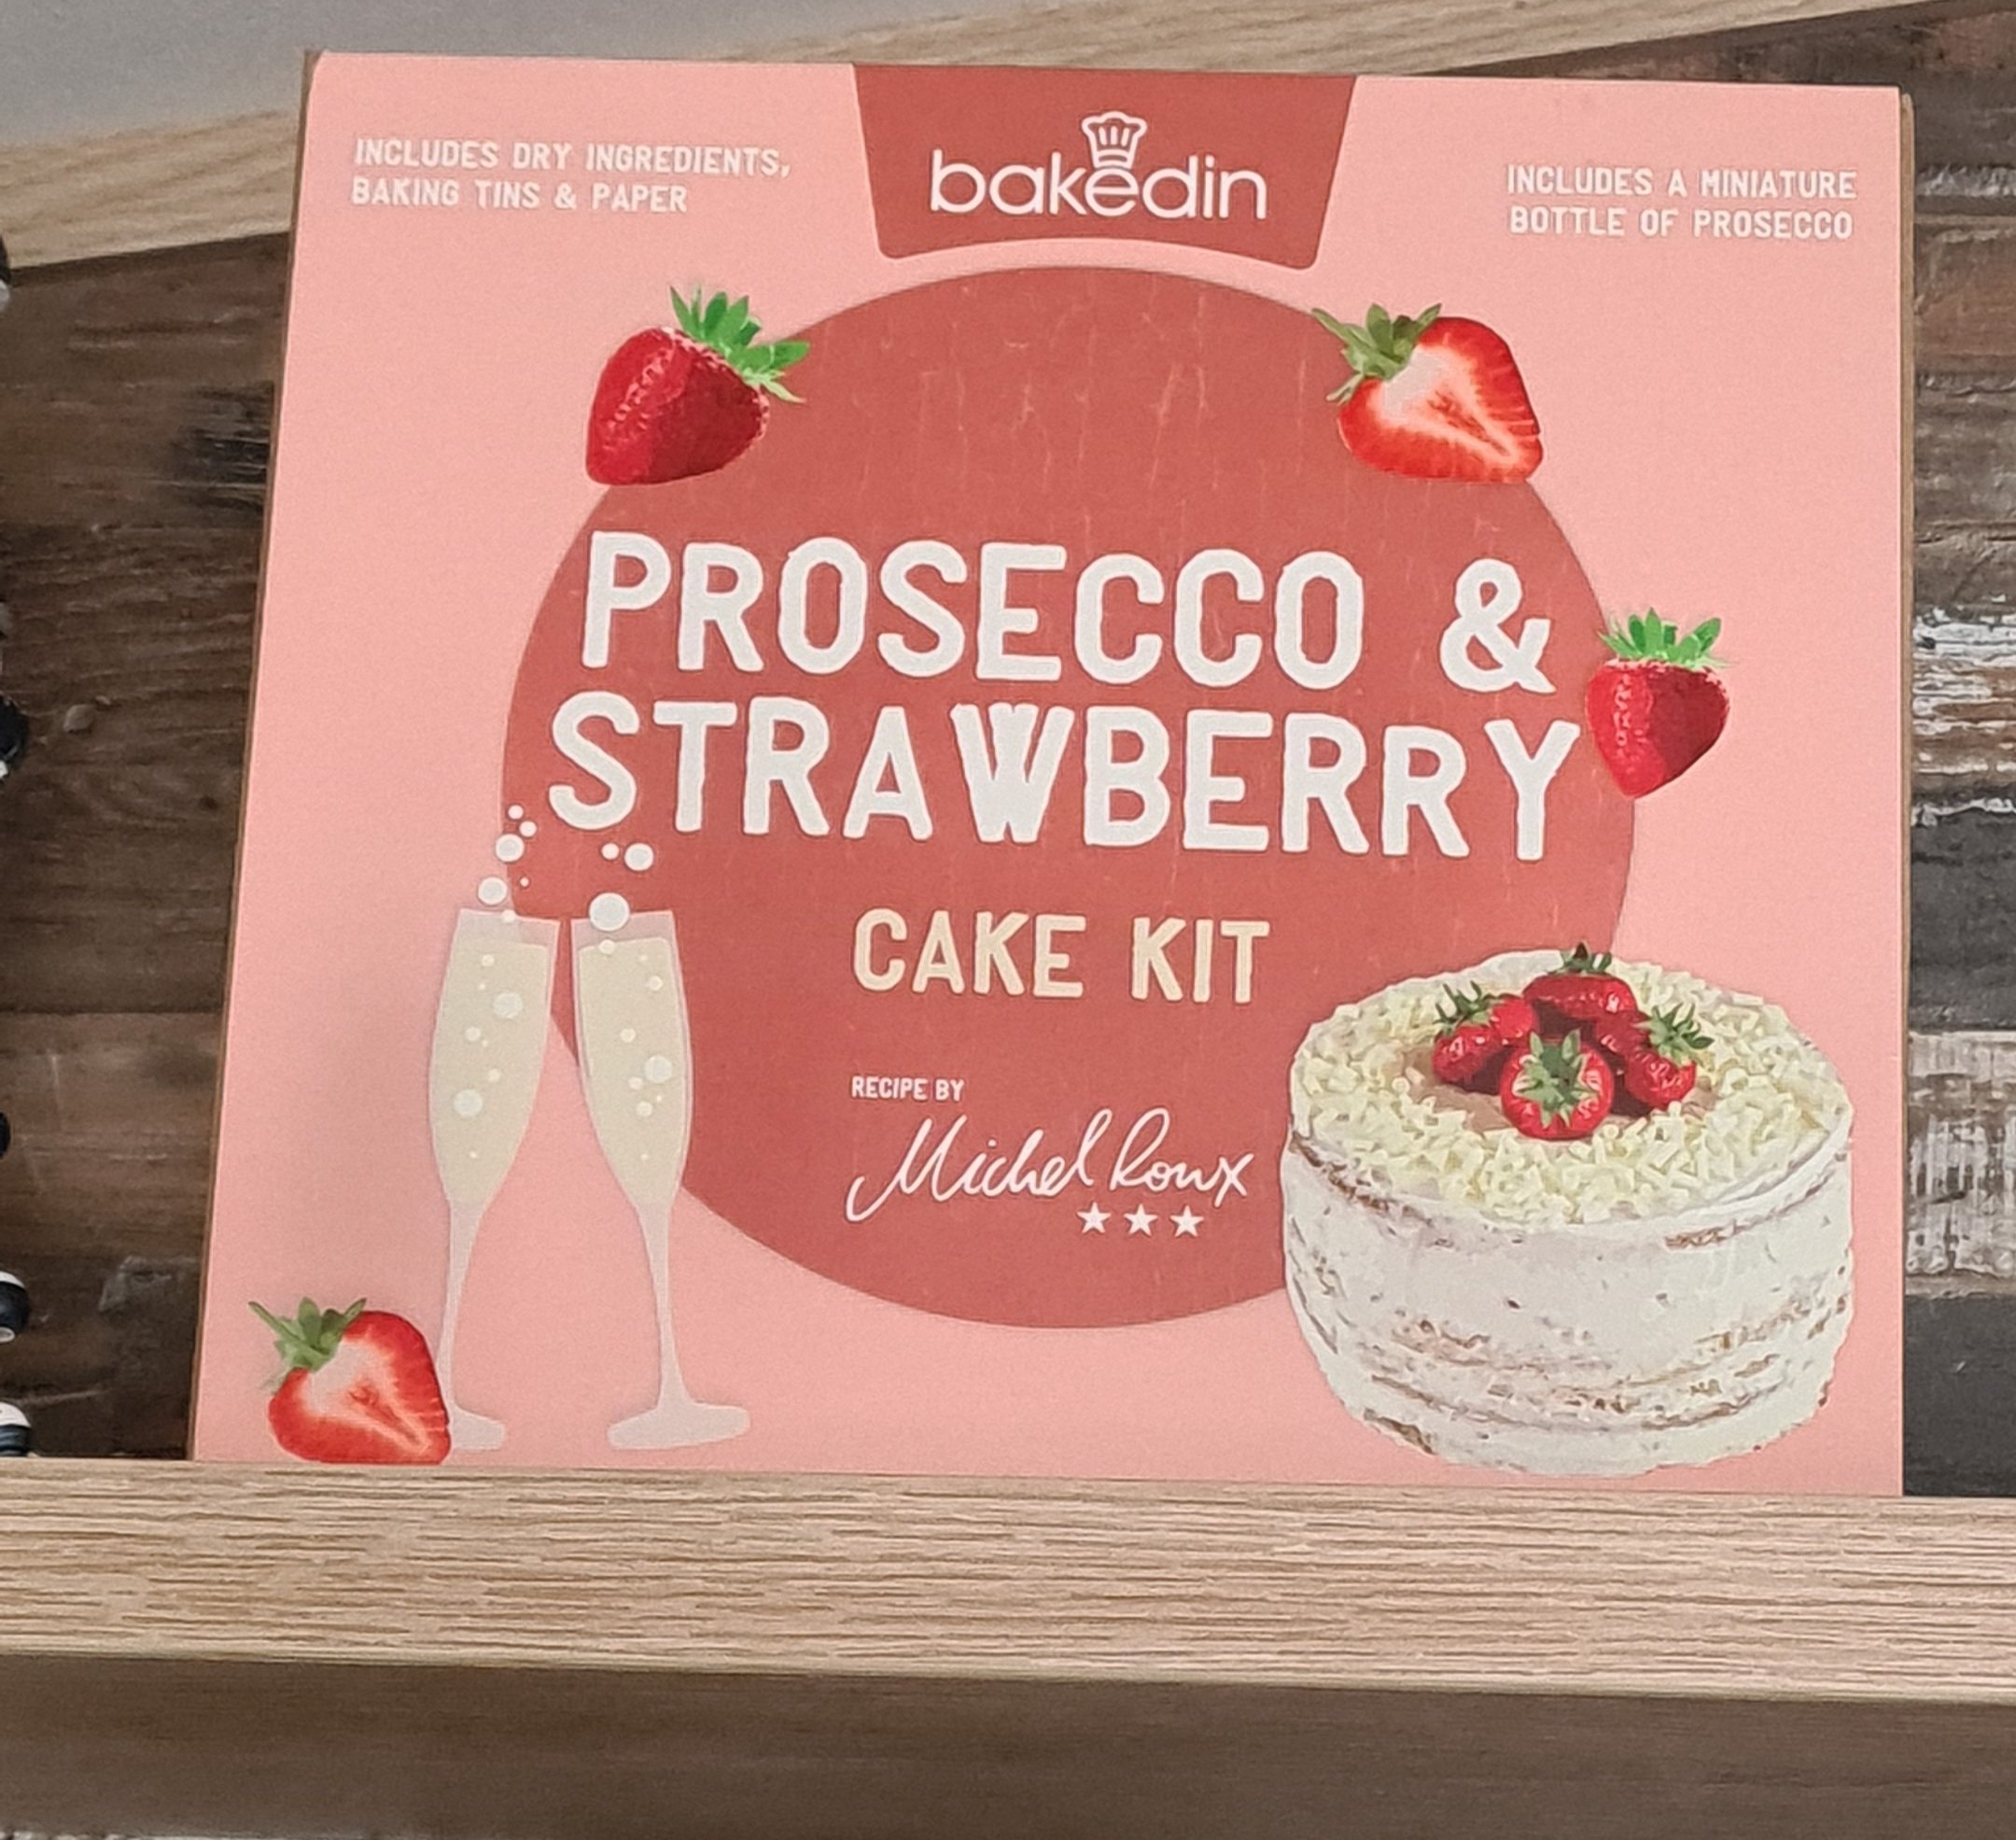 Strawberry and Prosecco Cake Kit from BakedIn